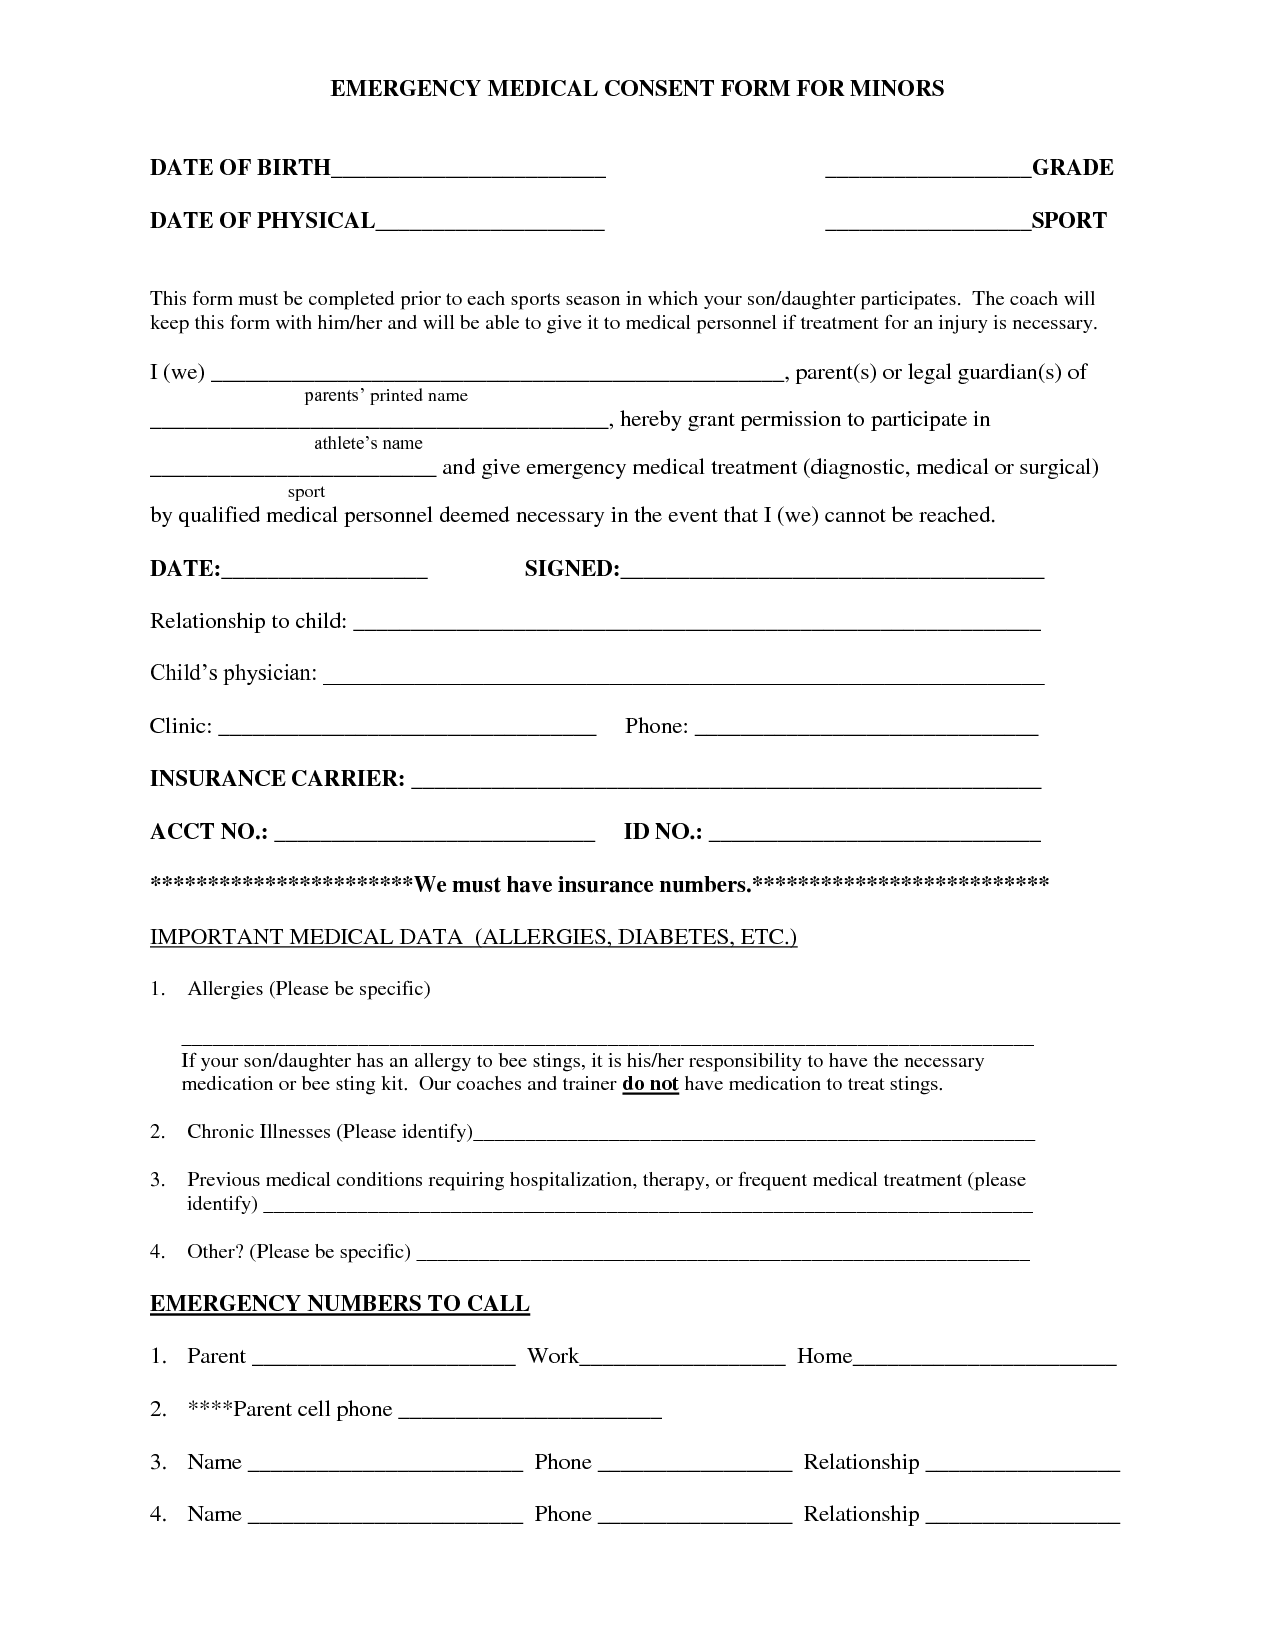 medical-consent-form-for-minors-free-printable-documents